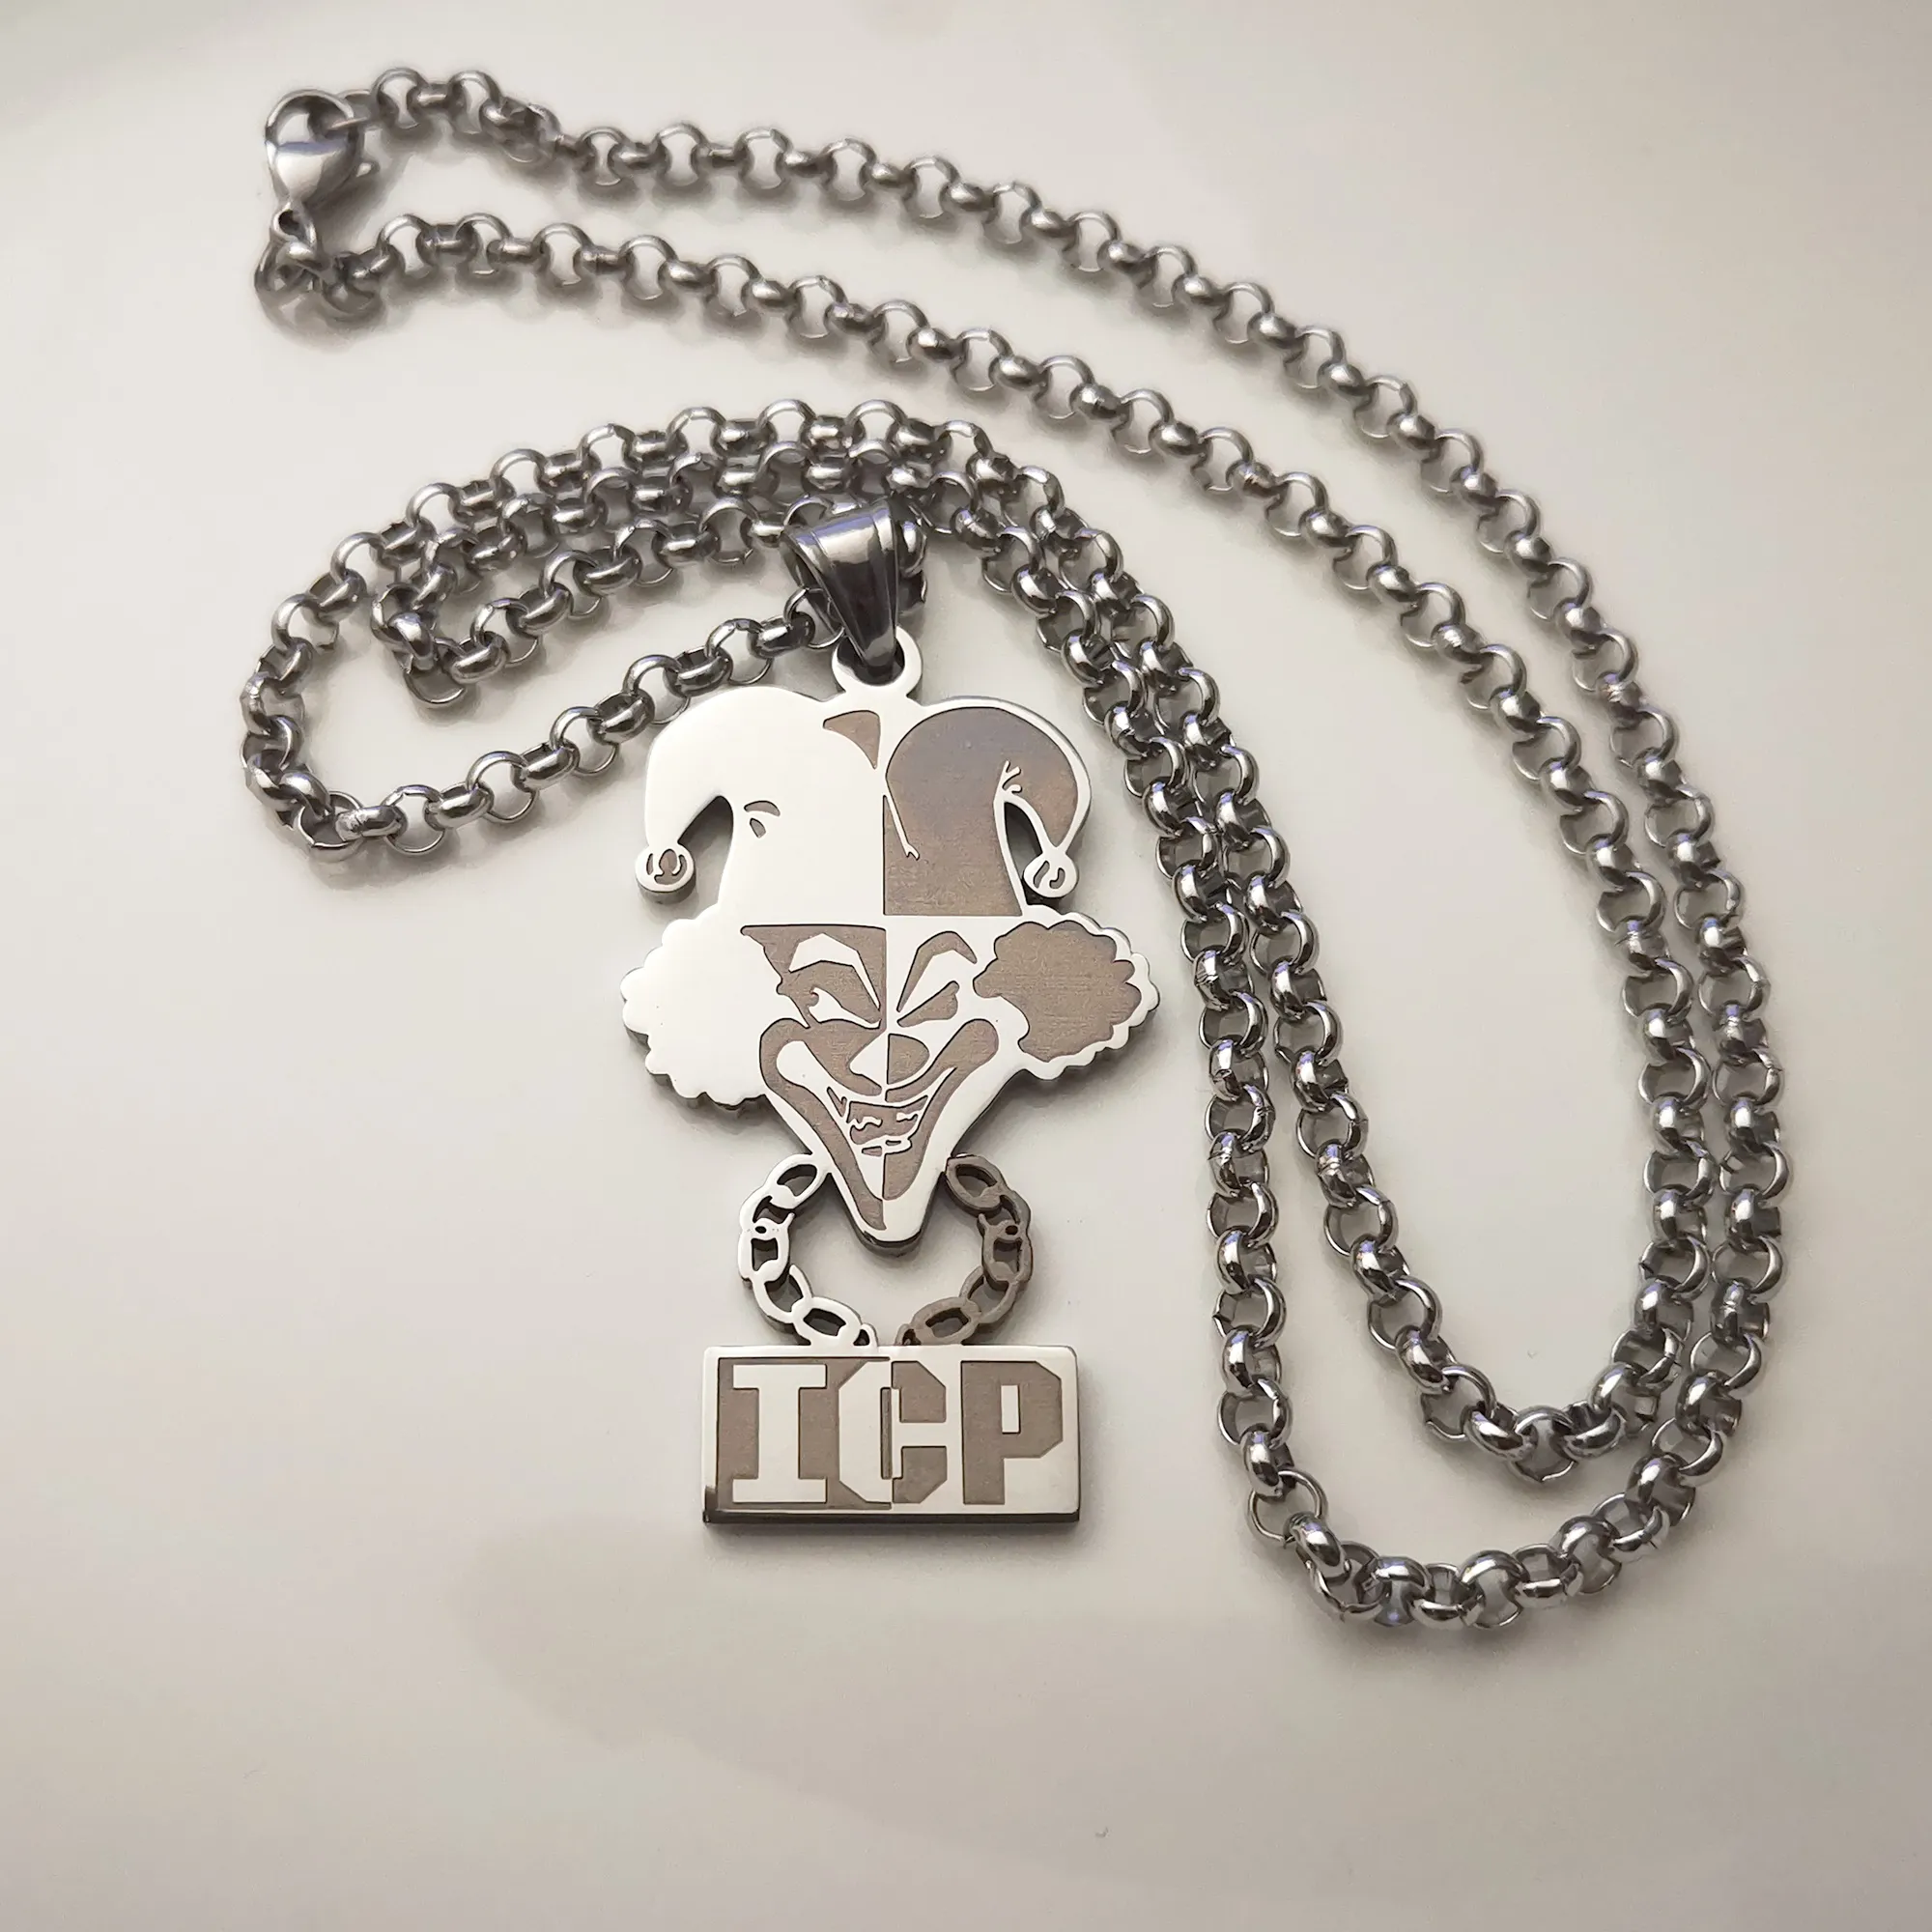 High Polished Silver Stainless Steel ICP CLOWN TWIZTID PENDANT CHARM NECKLACE 4mm 24INCH Rolo CHAIN Jugallo for Mens270P